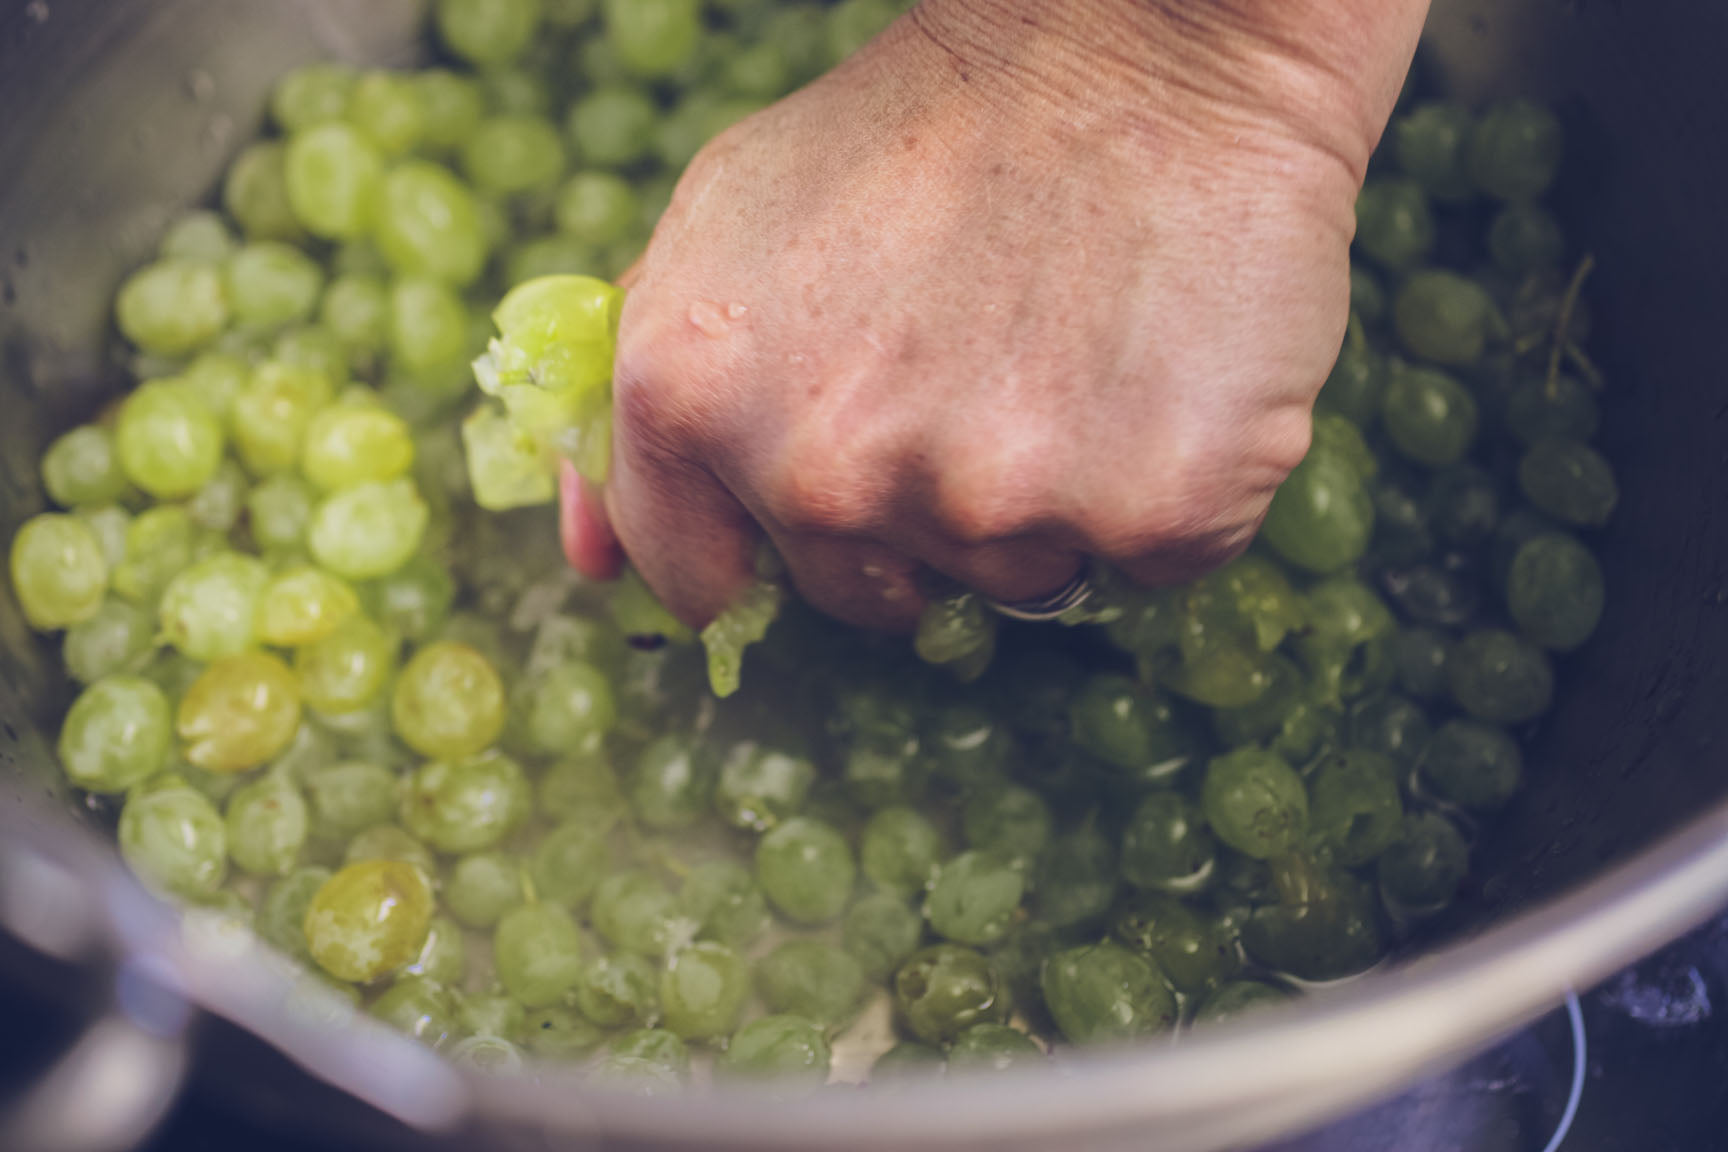 crush the grapes by hand